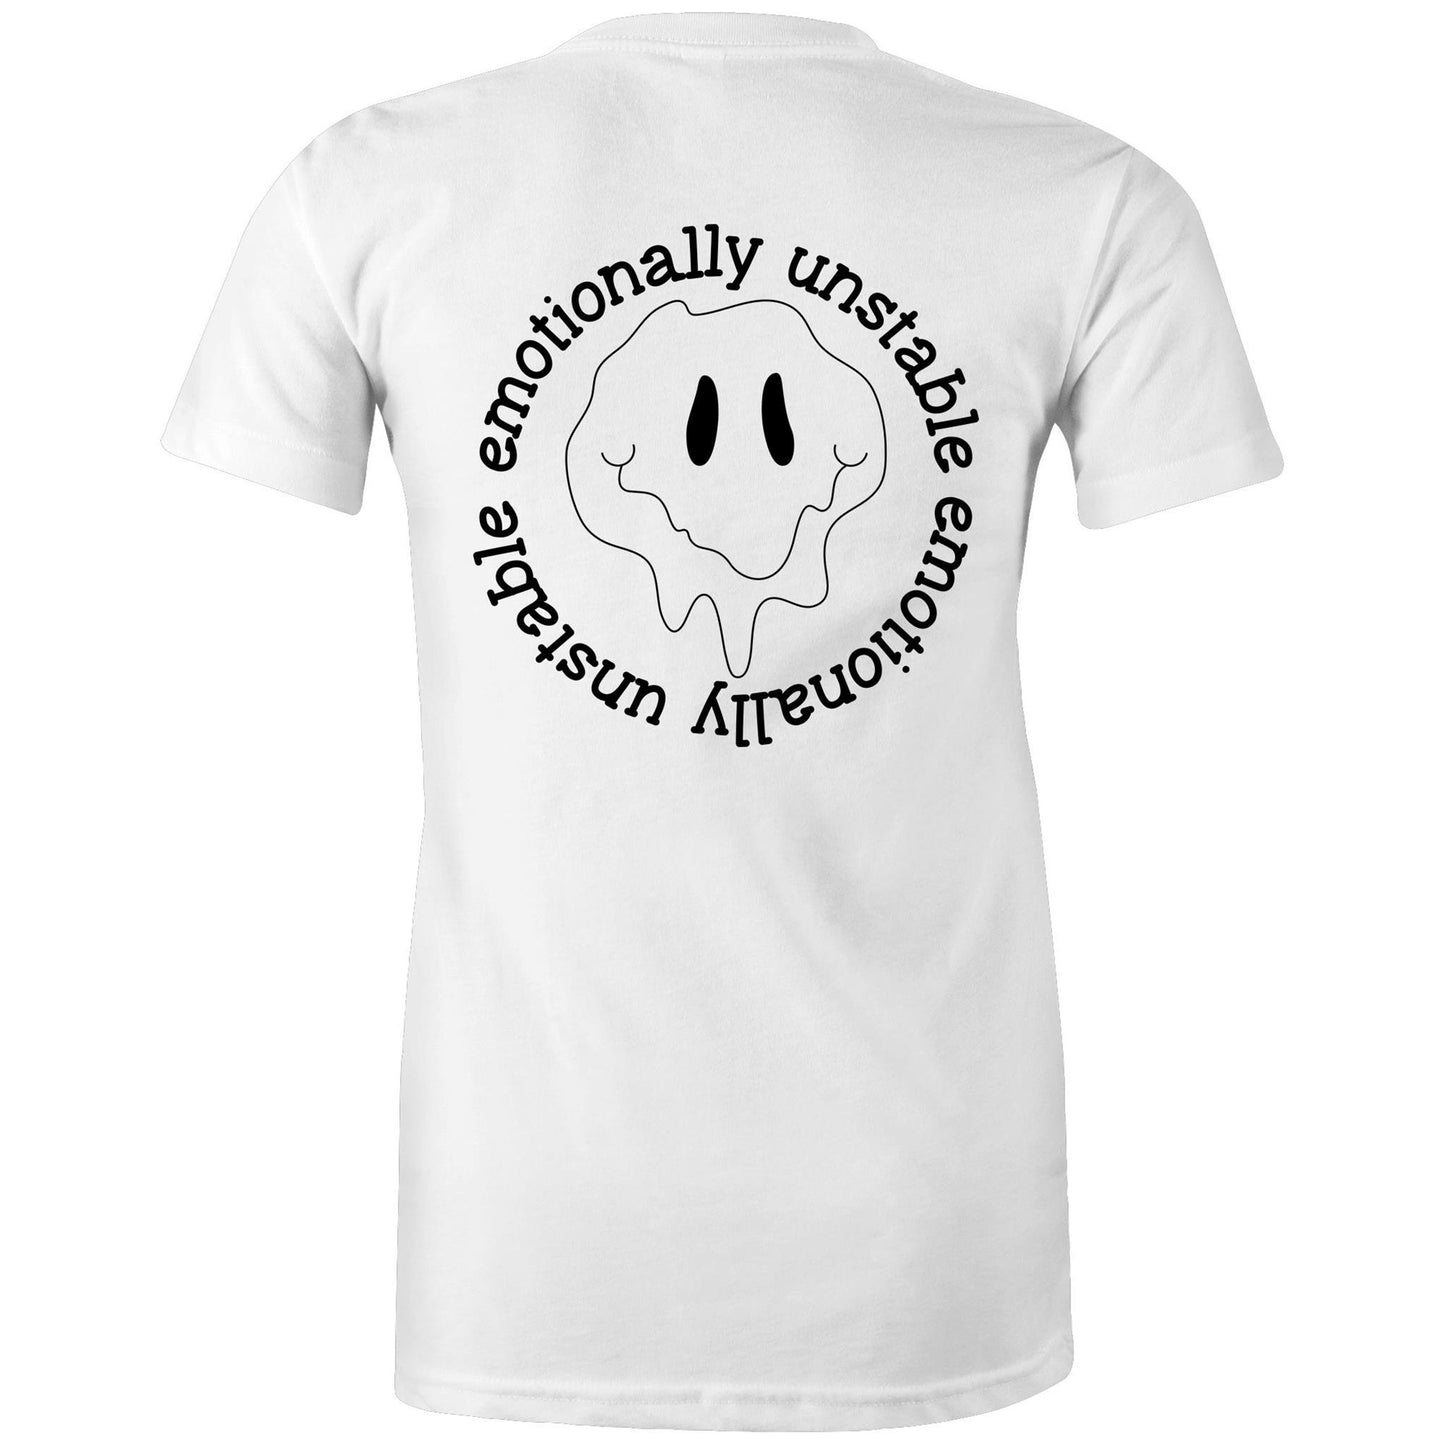 Womens Tee - Emotionally Unstable